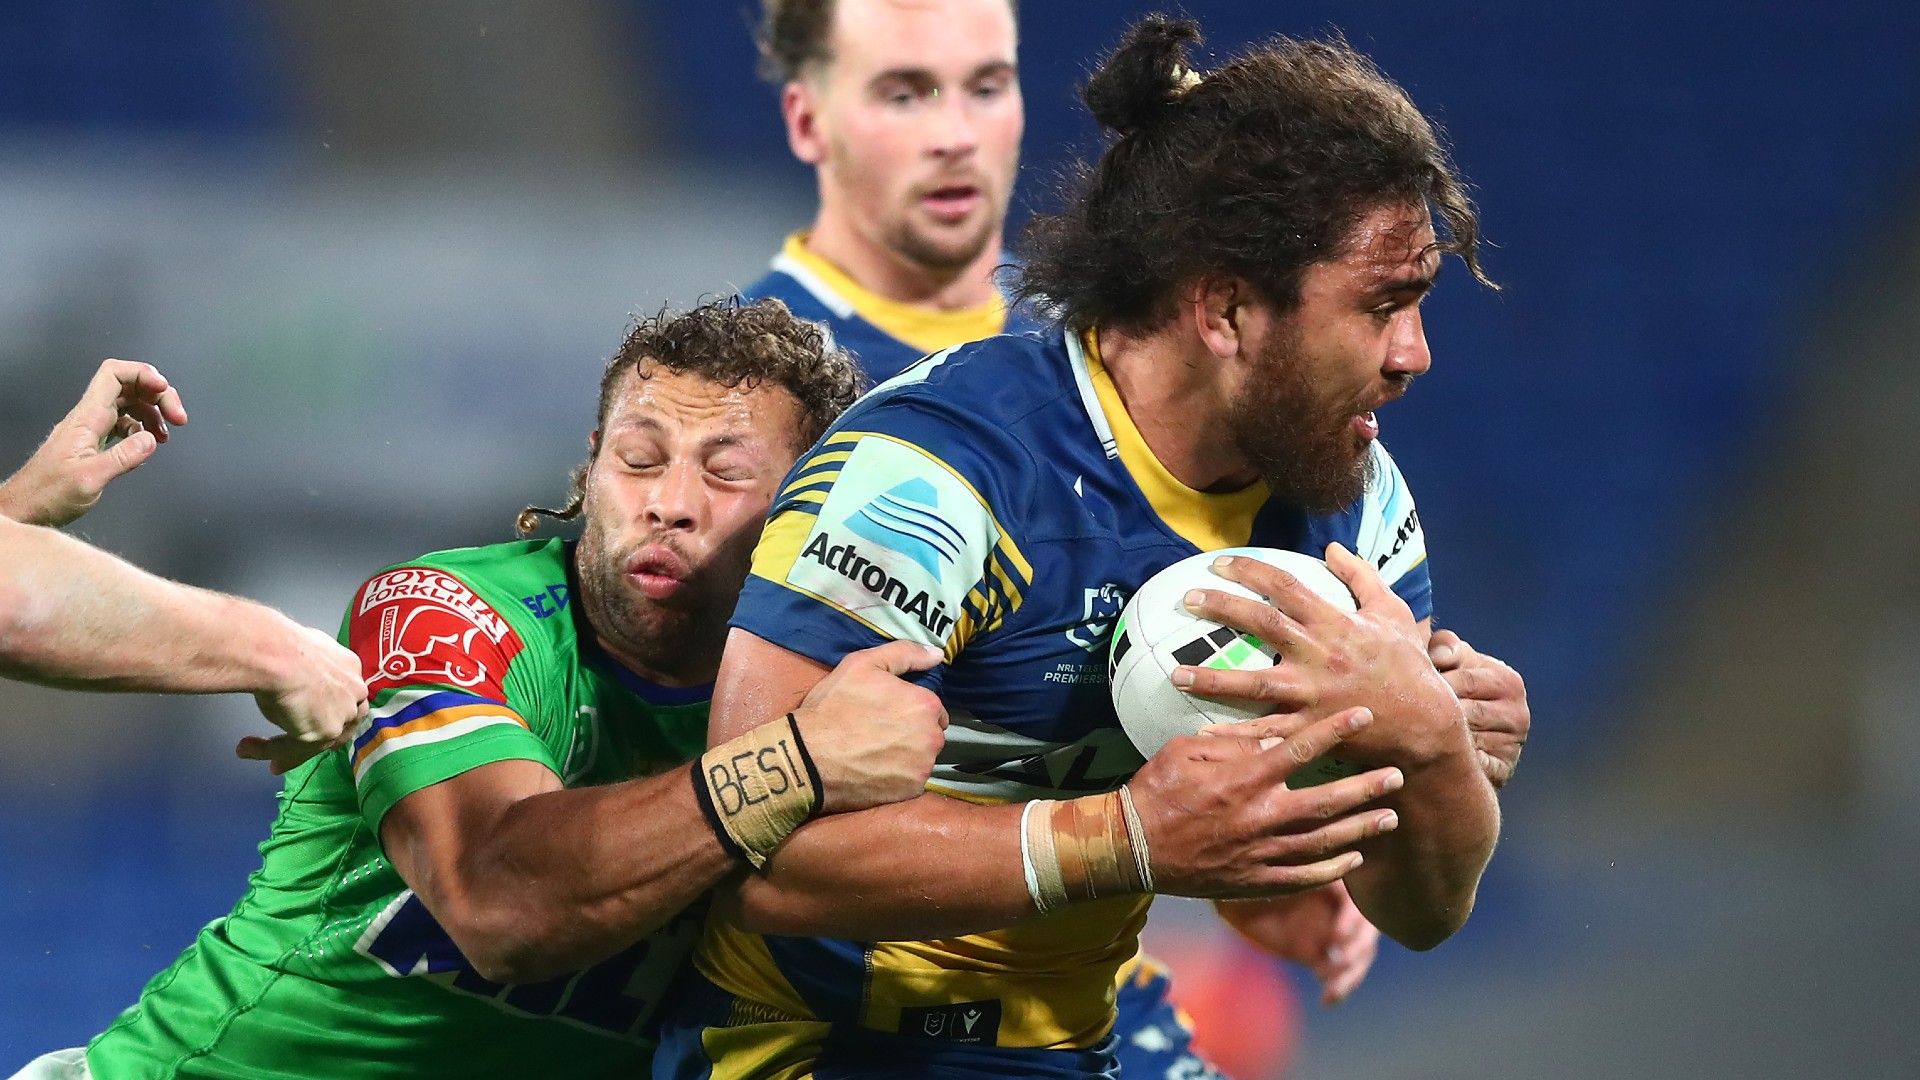 Isaiah Papali'i confirms he'll leave Parramatta Eels and join the Tigers in 2023